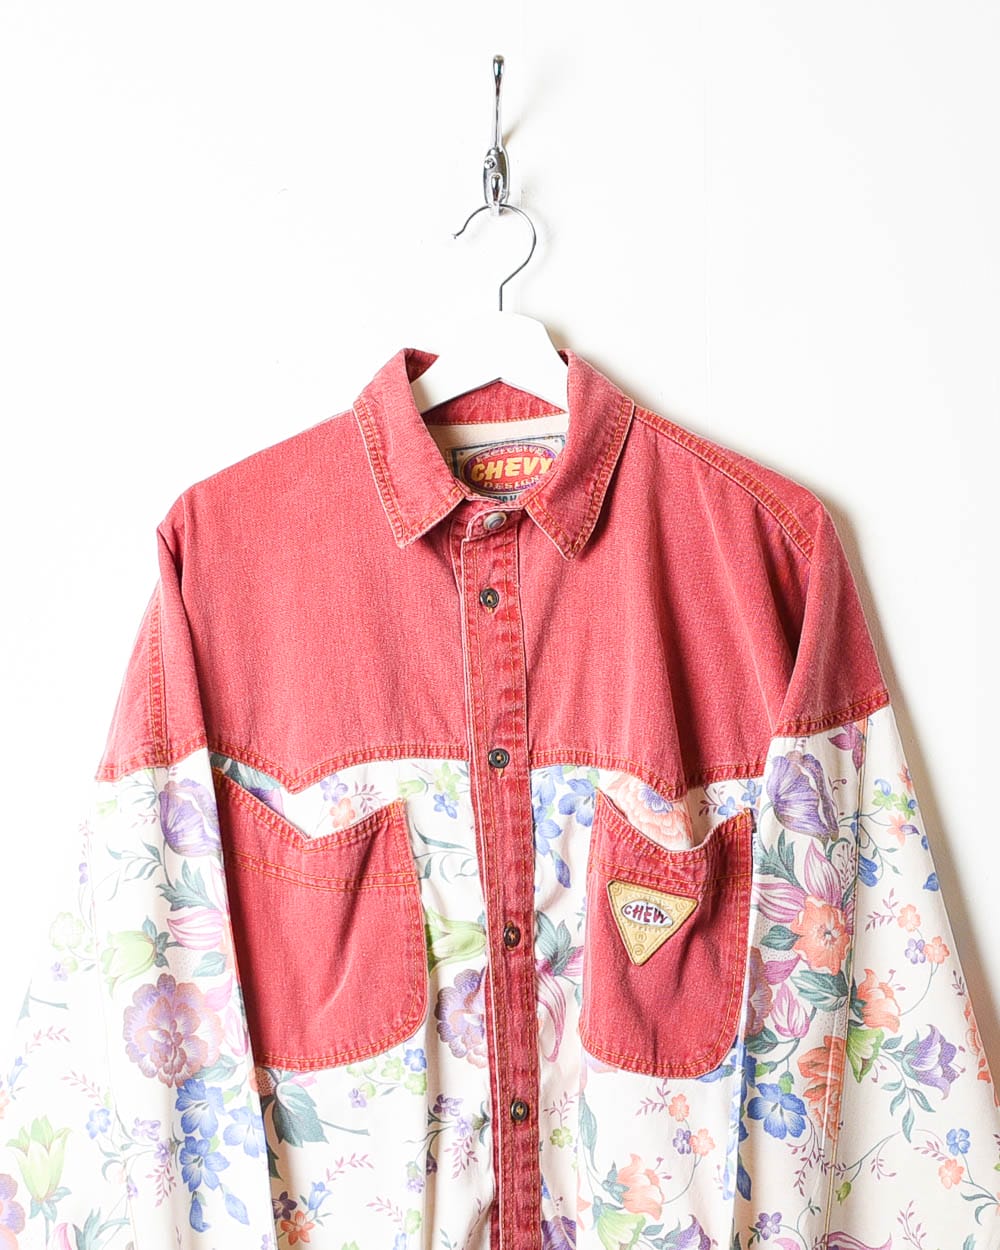 Red Chevy Floral All-Over Print Shirt - X-Large